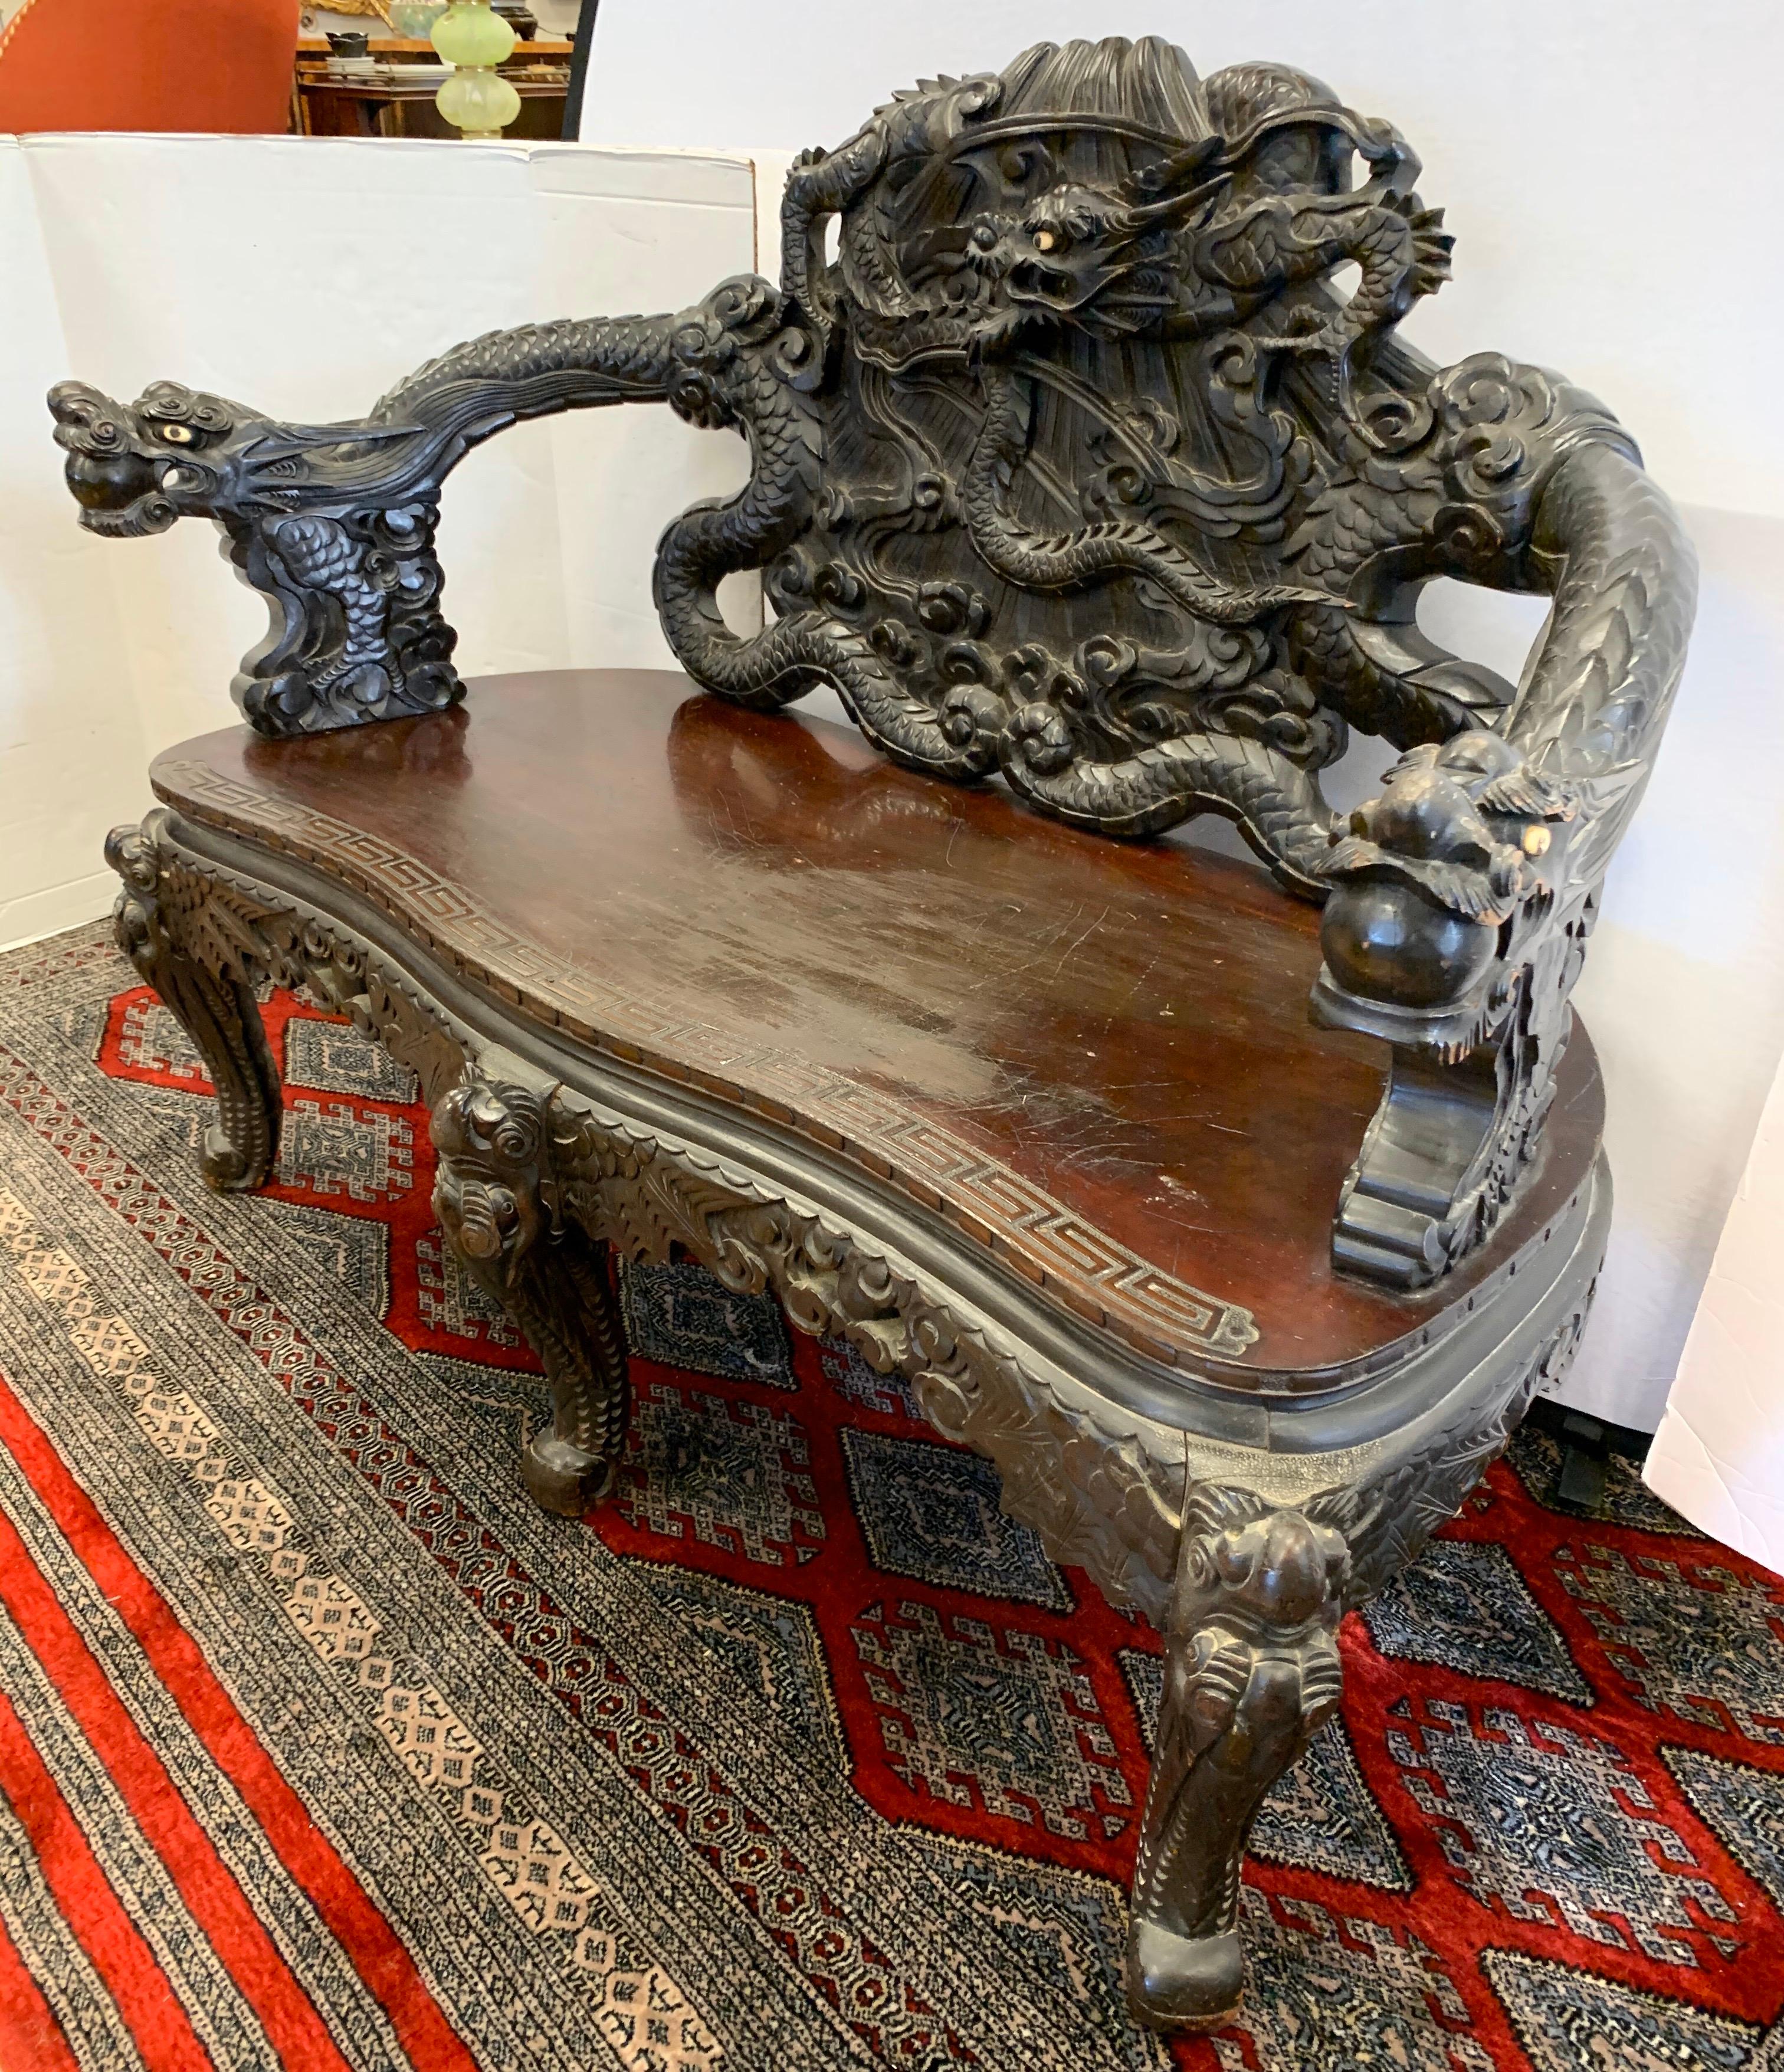 Antique and unique Chinese bench is finely and ornately carved with dragons with white eyes of hard stone. Center dragon is writhing and entwined within itself. Dragons on arms are holding pearls in their mouths, a metaphor for longevity and